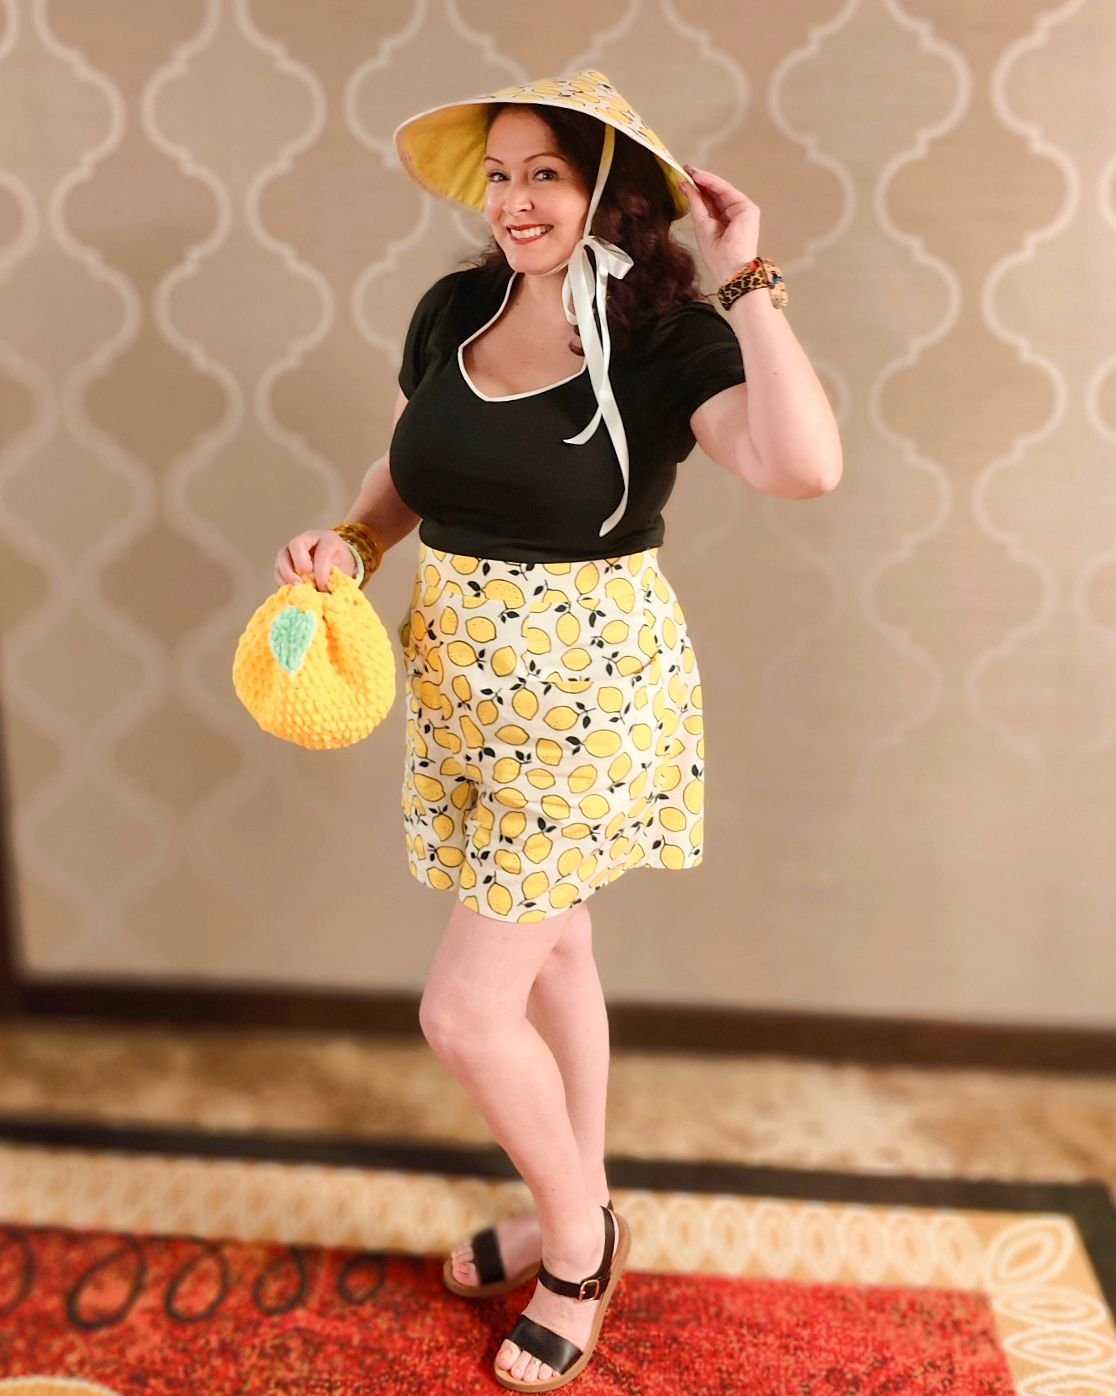 Are you sick of outfit posts yet? Or are ya hungry for more!? 🤪
🍋🍋🍋
This was my car show outfit. My Lemony Loretta's and Mary sunhat. There was supposed to be a Rita top, but whoever sewed it had an outer body experience and forgot to use a longe